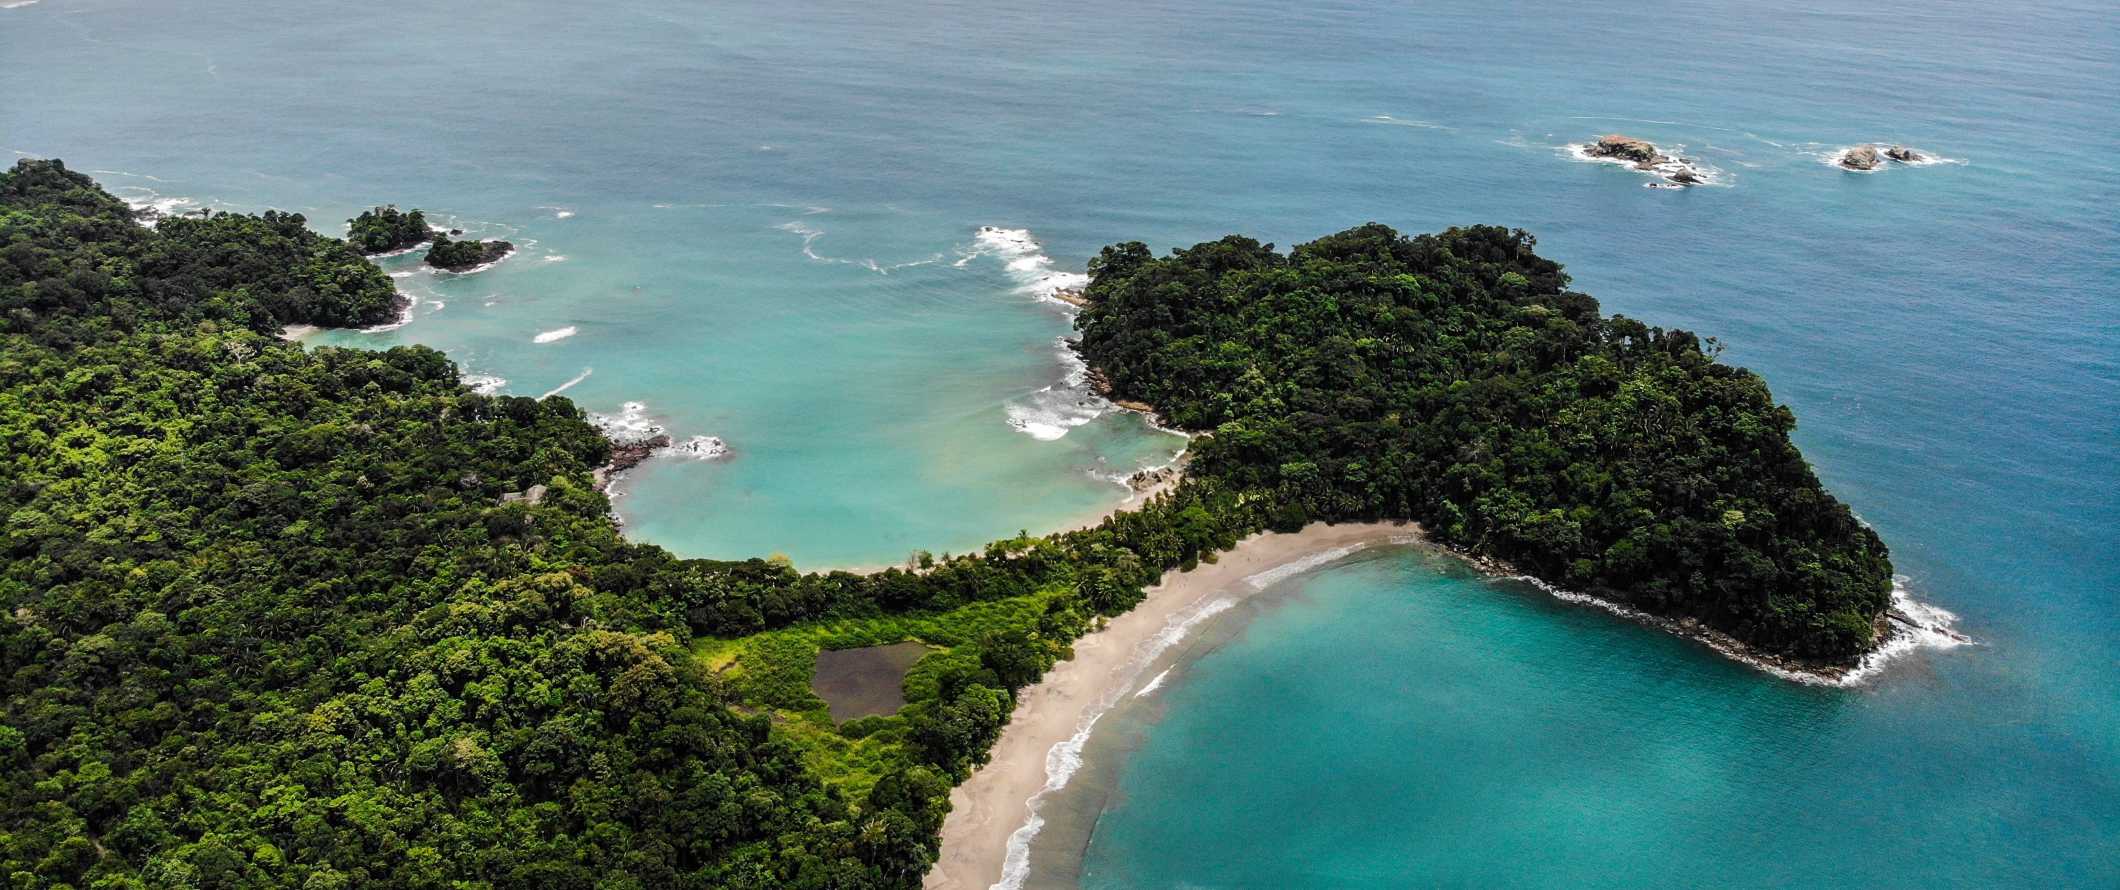 Aerial view of the turquoise waters off the coast of Manuel Antonio, Costa Rica